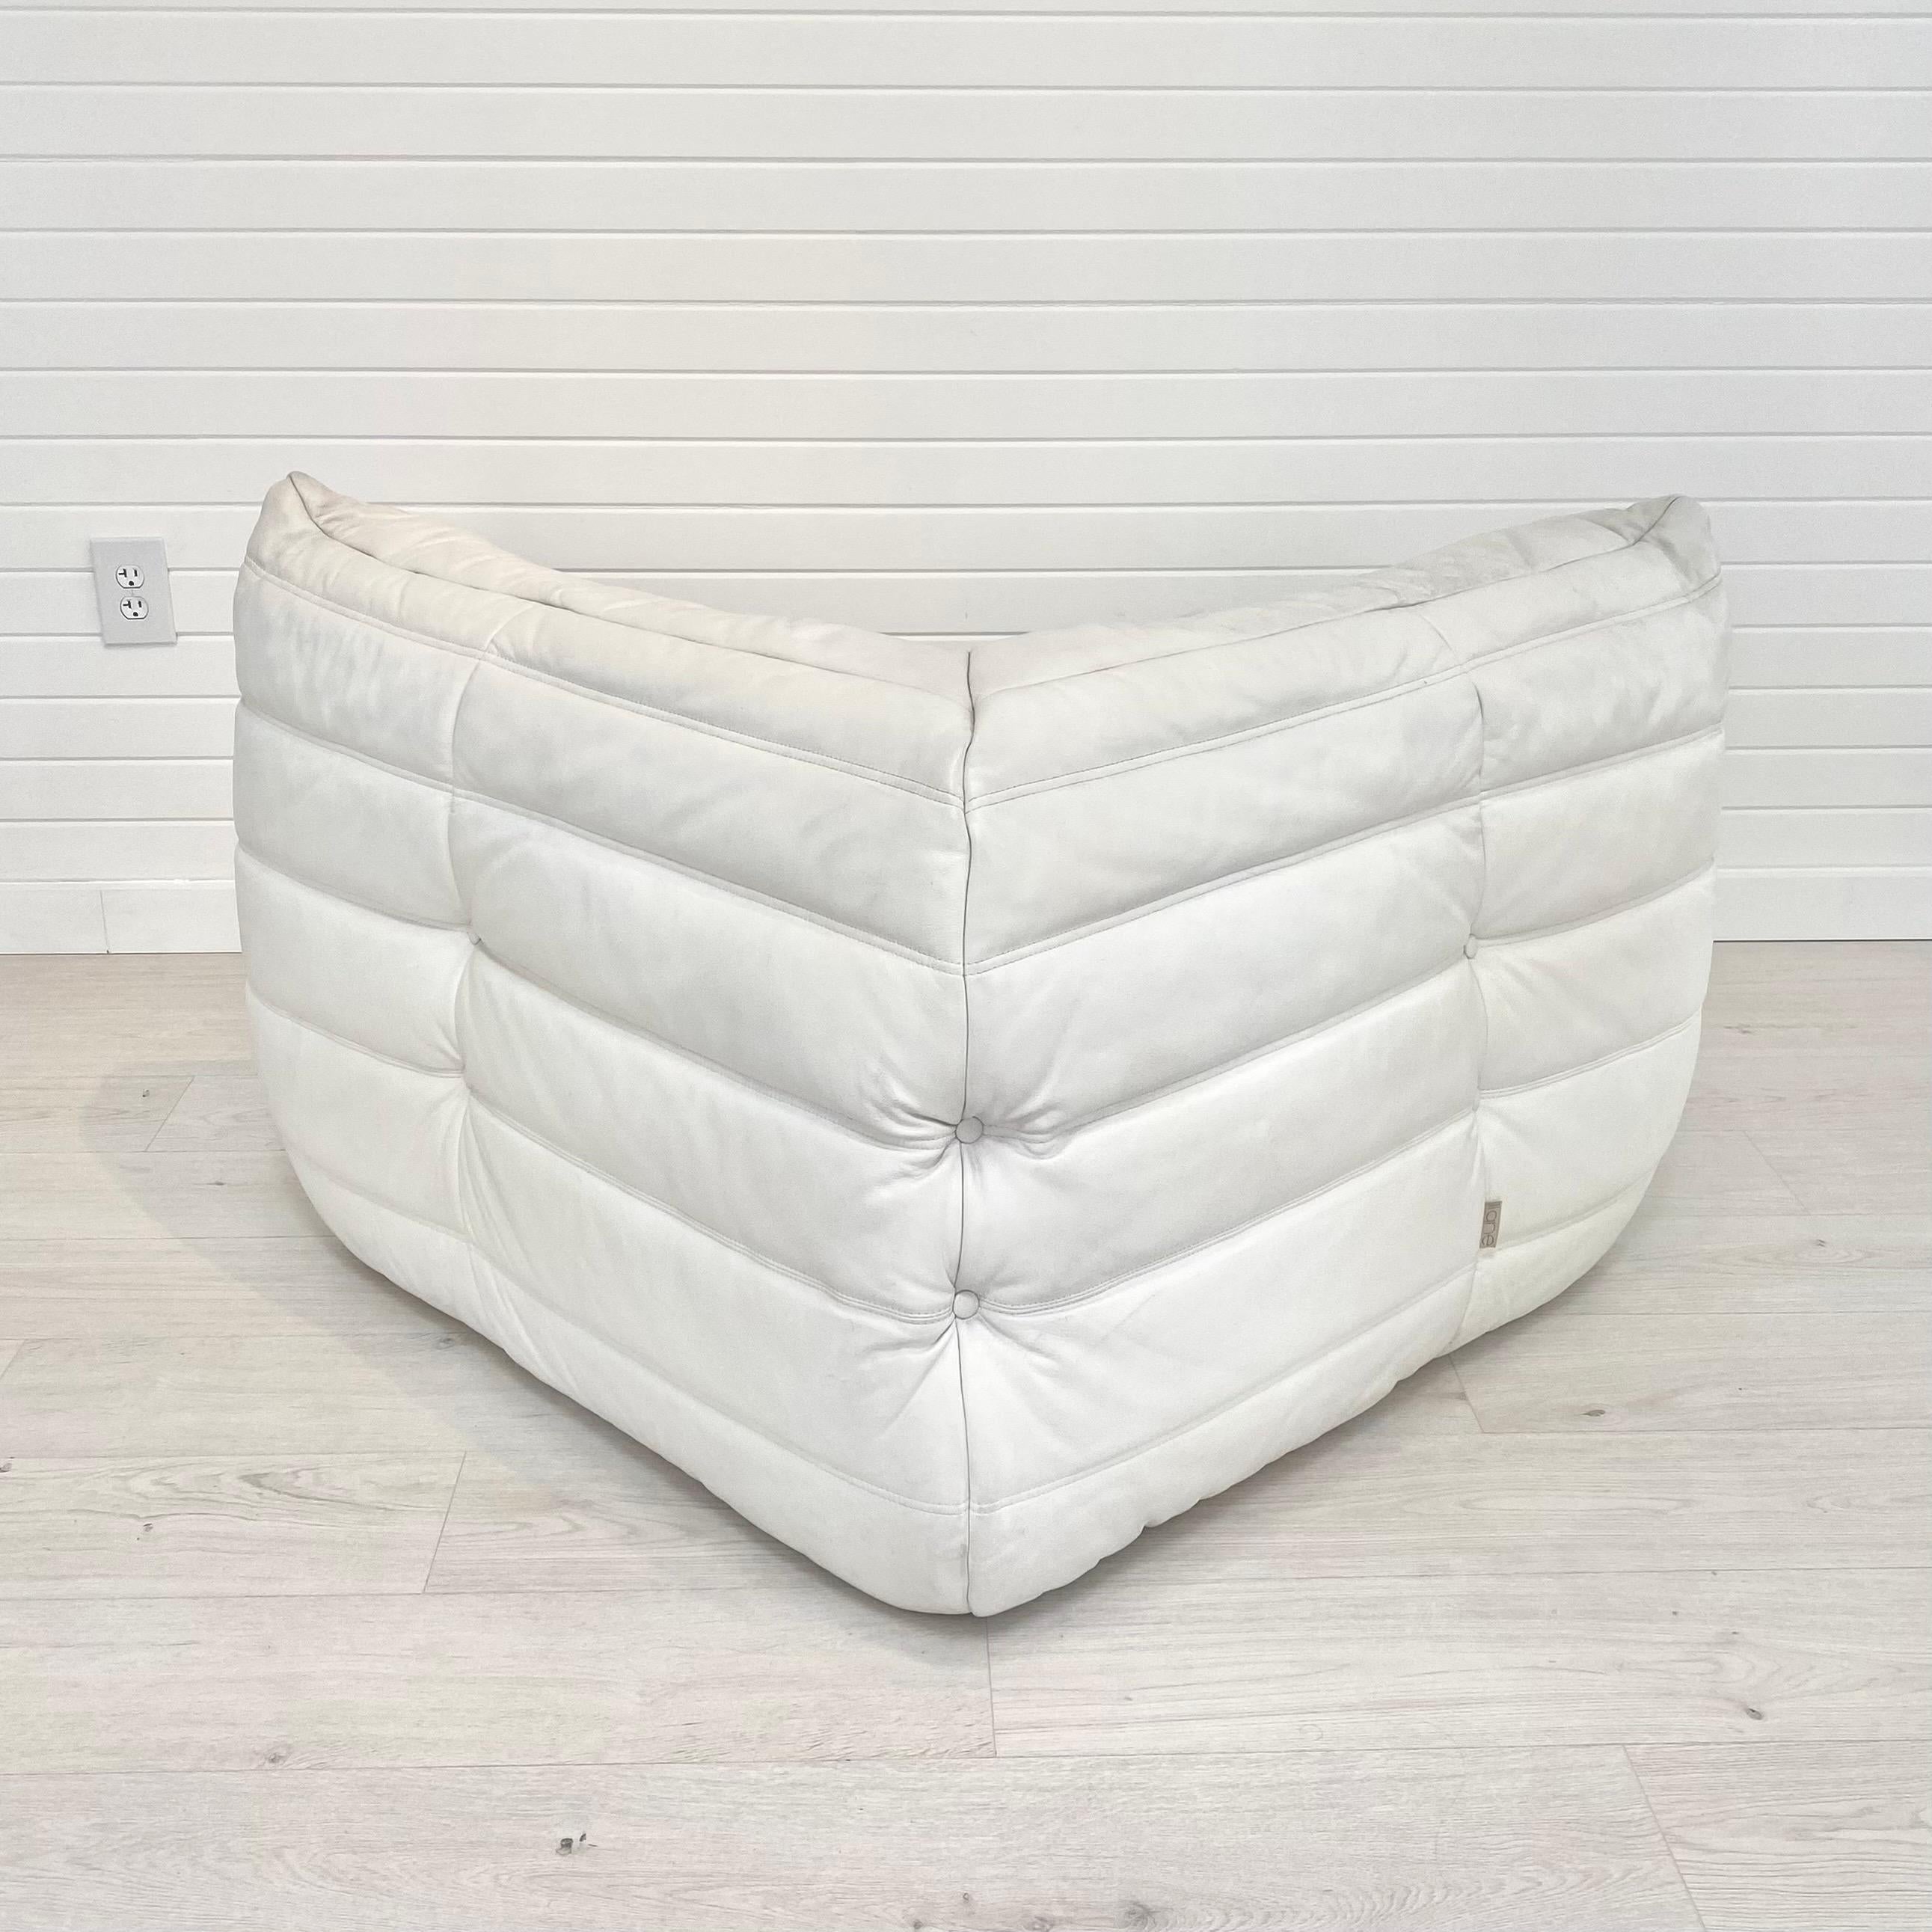 20th Century White Leather Corner Togo Seat by Ligne Roset, 1980s France For Sale